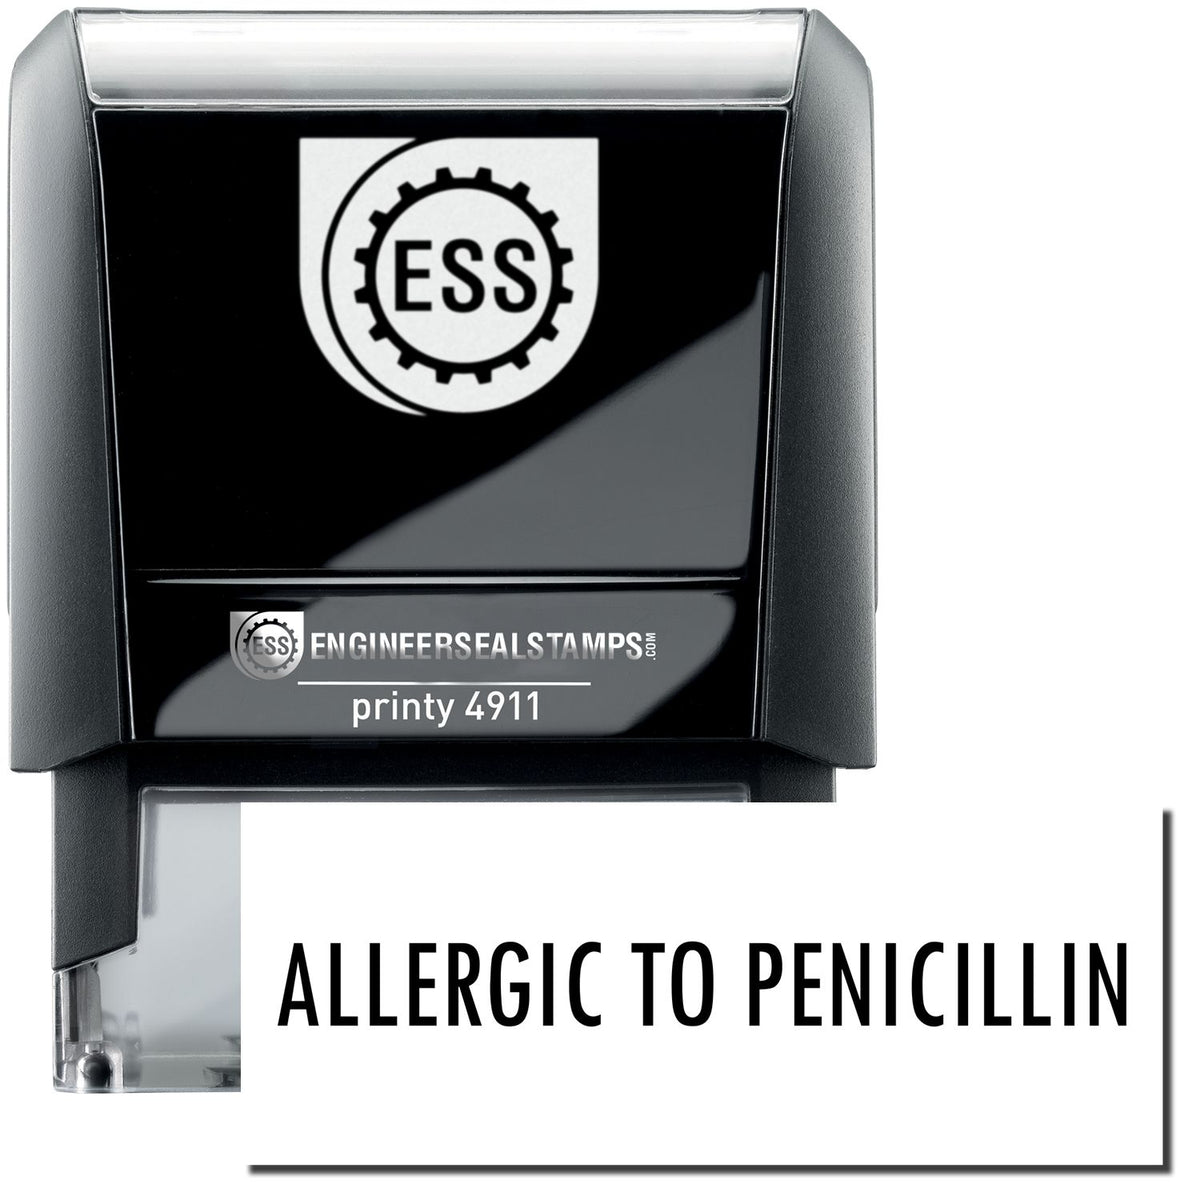 A self-inking stamp with a stamped image showing how the text &quot;ALLERGIC TO PENICILLIN&quot; is displayed after stamping.